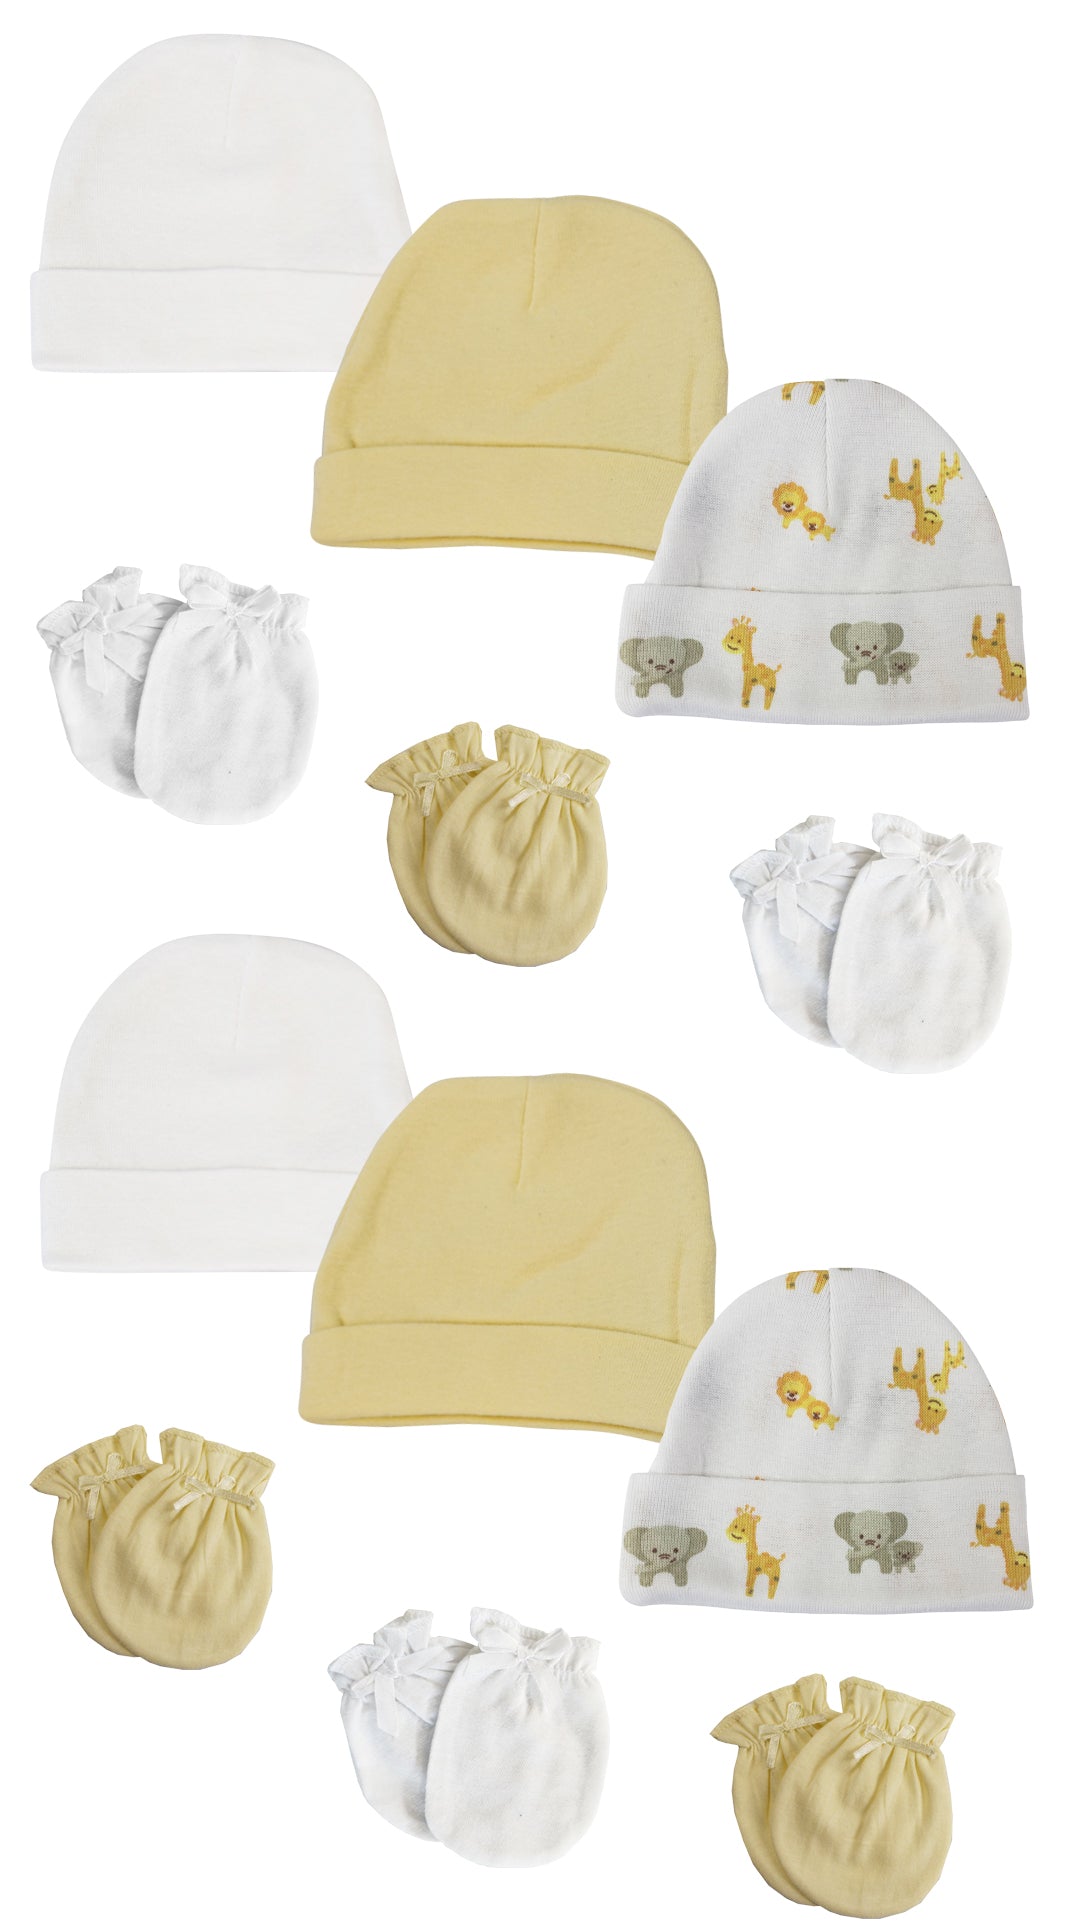 Baby Boy, Baby Girl, Unisex Infant Caps and Mittens (Pack of 12) NC_0391